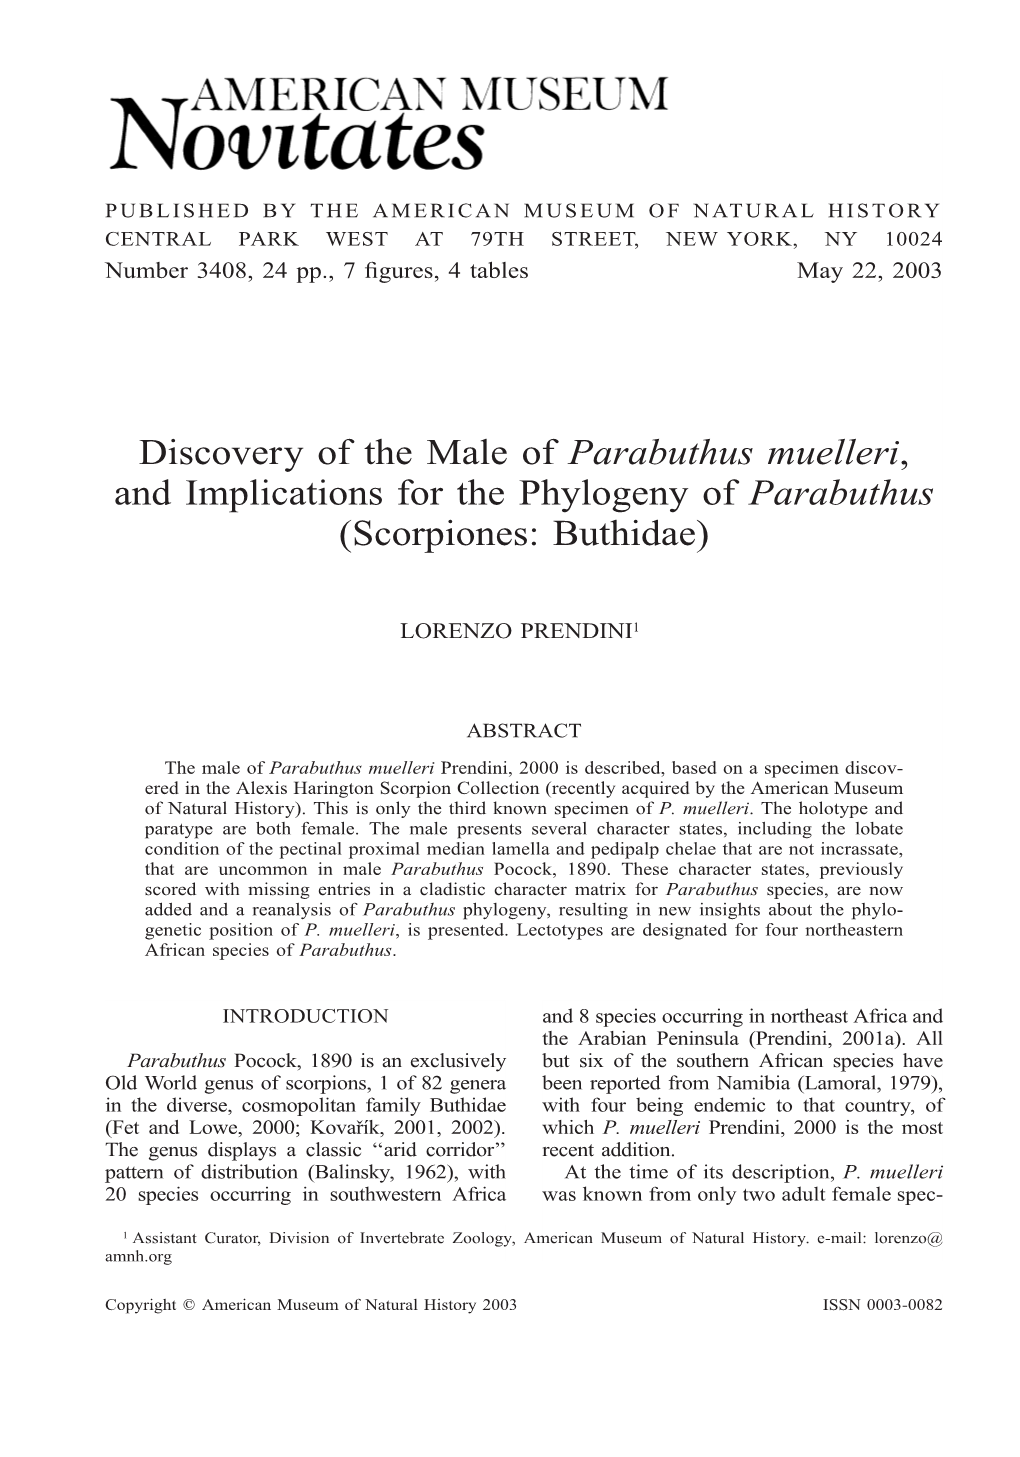 Parabuthus Muelleri, and Implications for the Phylogeny of Parabuthus (Scorpiones: Buthidae)